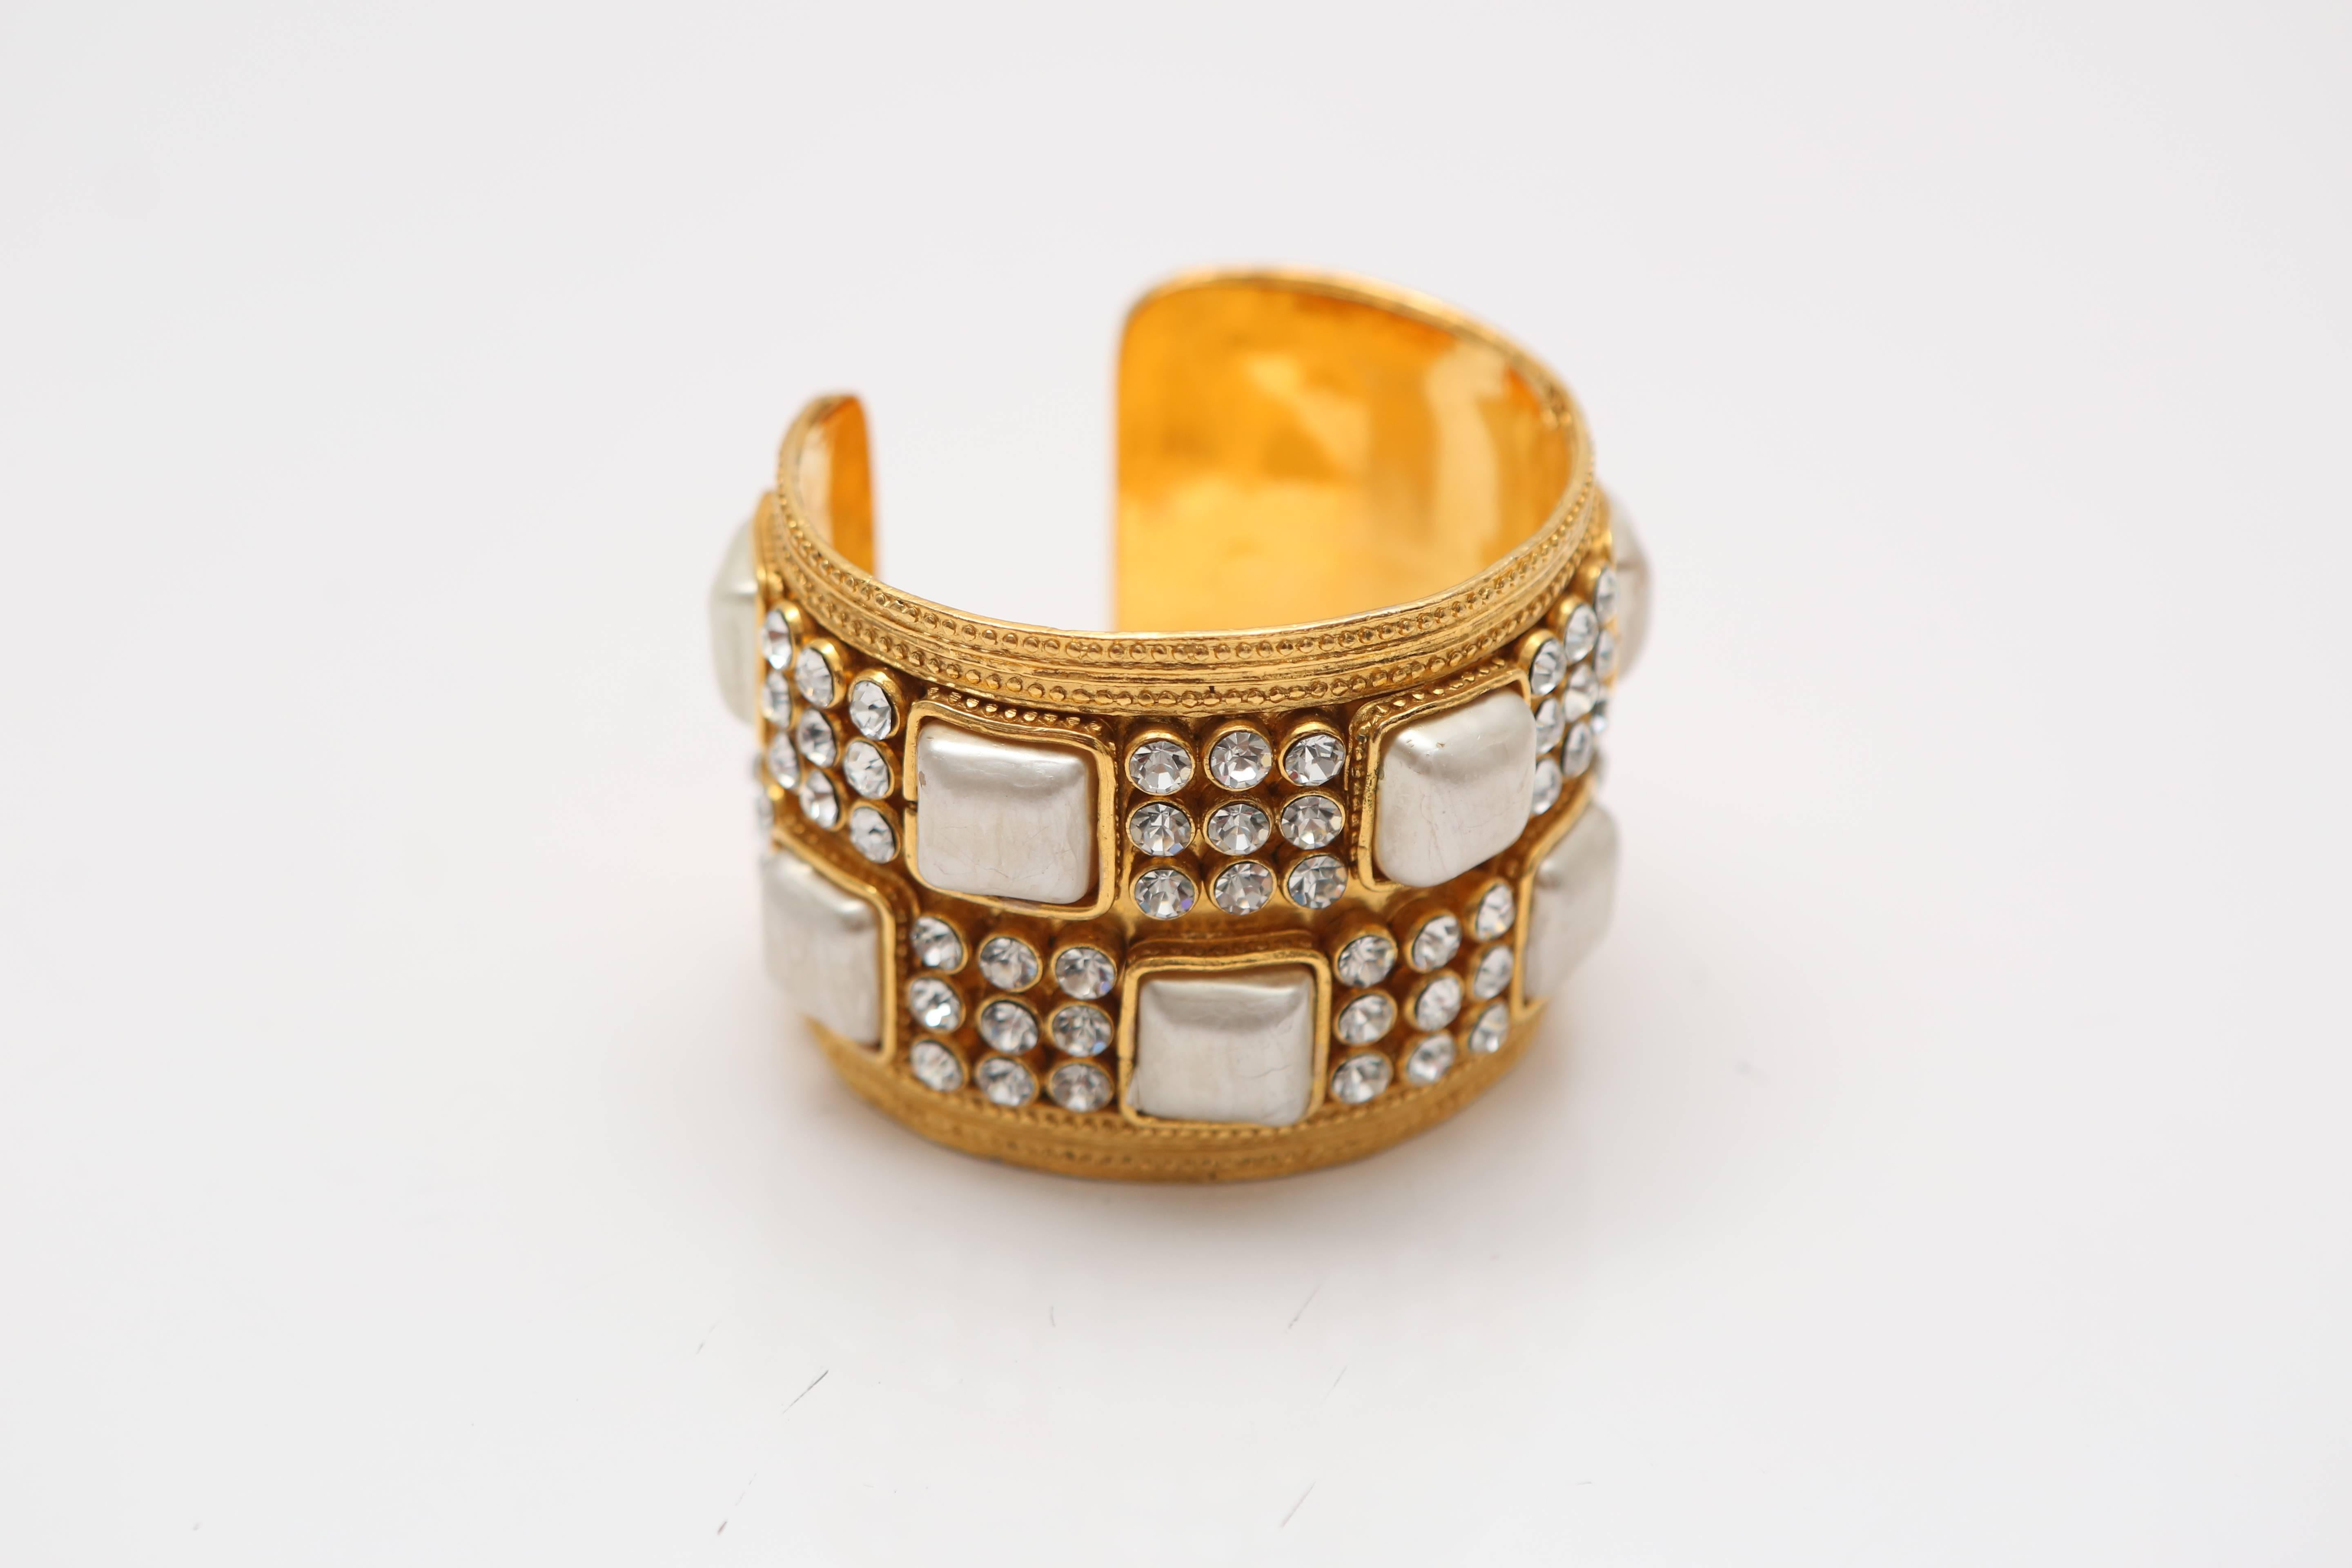 Chanel gold plated cuff with ivory stones and rhinestone detail.